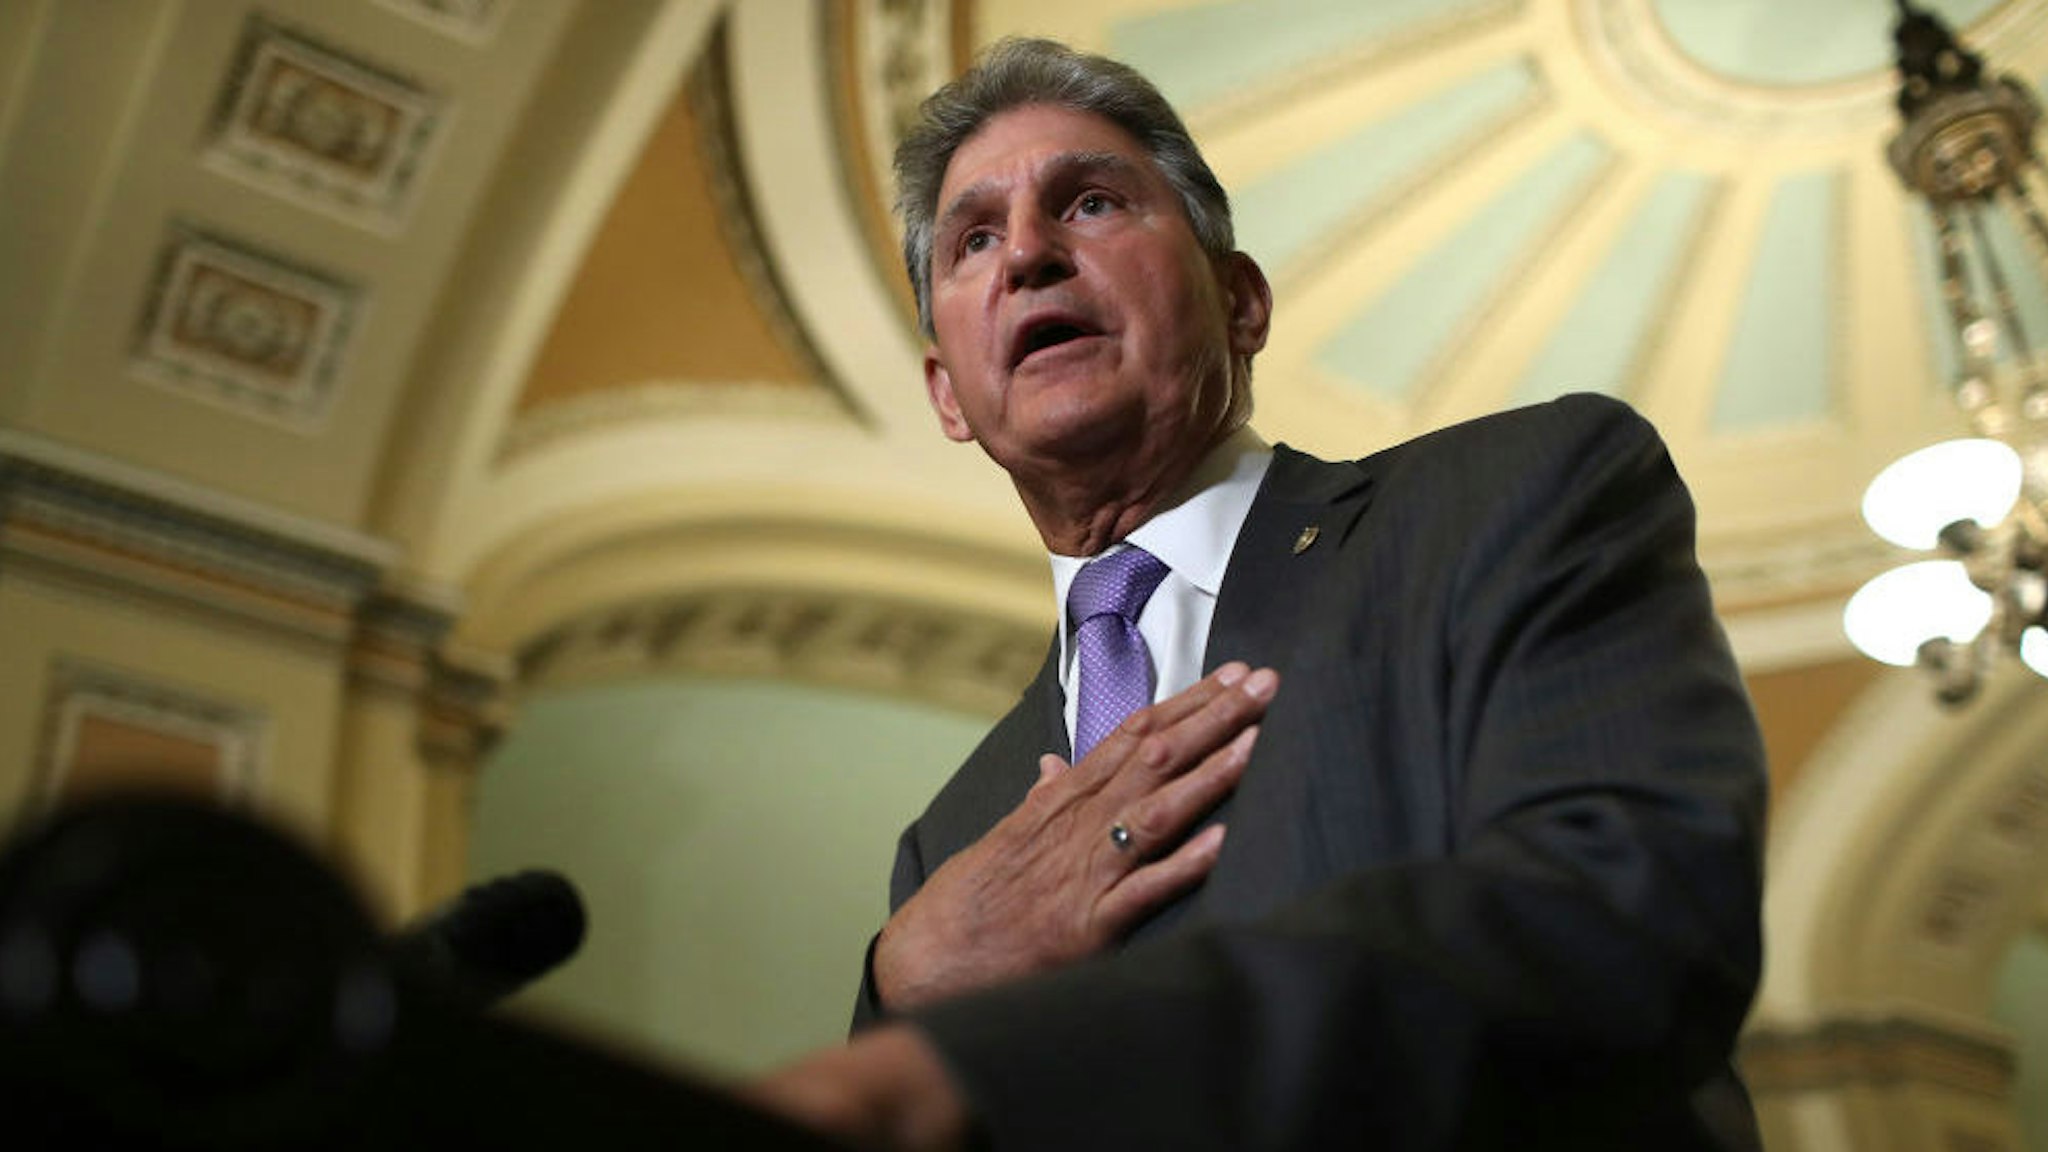 WASHINGTON, DC - JULY 09: Sen. Joe Manchin (D-WV) answers questions at the U.S. Capitol on July 09, 2019 in Washington, DC. Senate Majority Leaders Chuck Schumer answered a range of questions during the press conference including queries on recent court cases involving the Affordable Care Act.